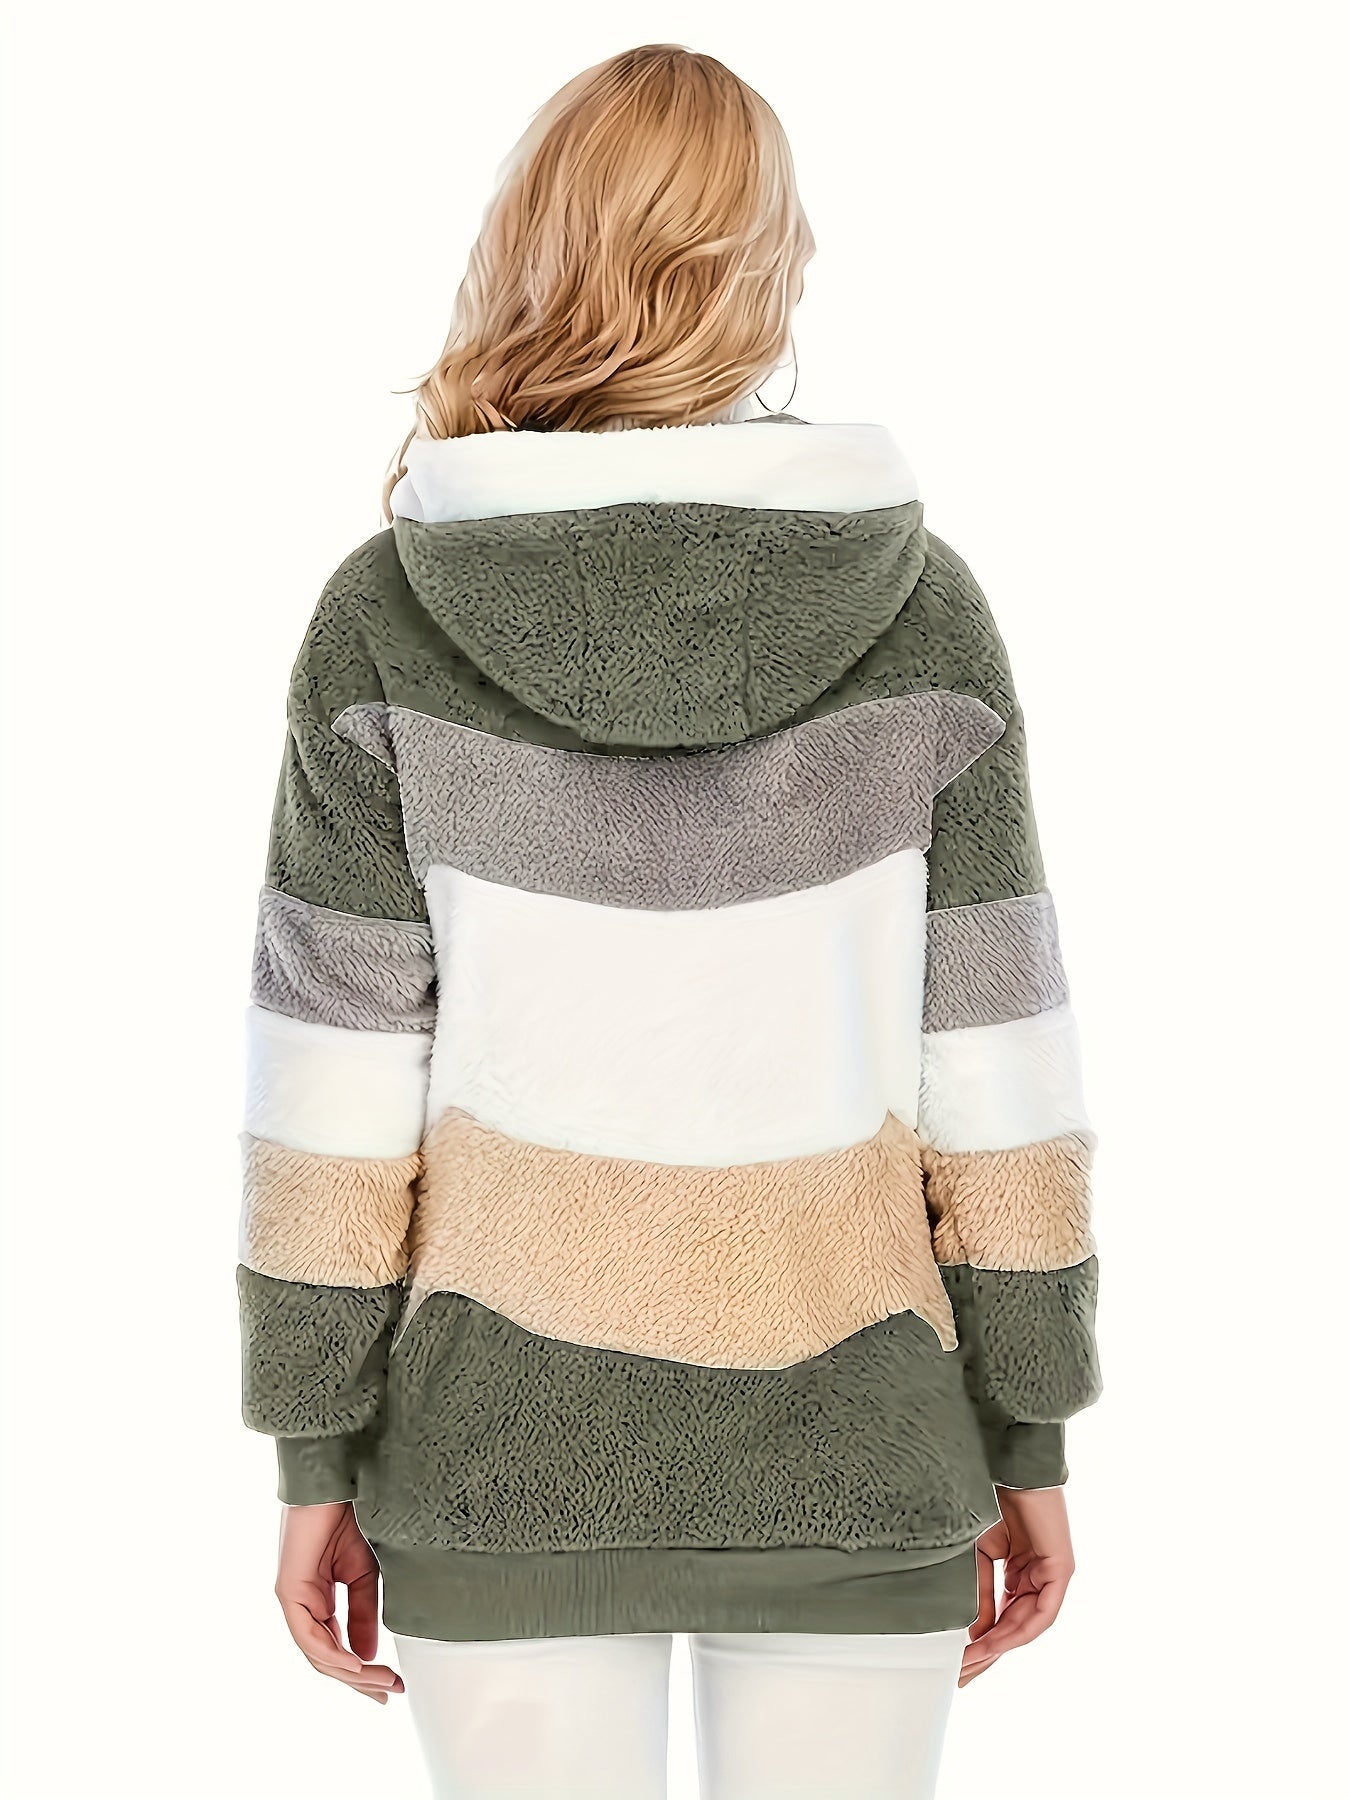 Ultimate Warm Hooded Coat with Drawstring Detail - Your Go - for Staying Cozy and Stylish in All Seasons - CasualFlowshop